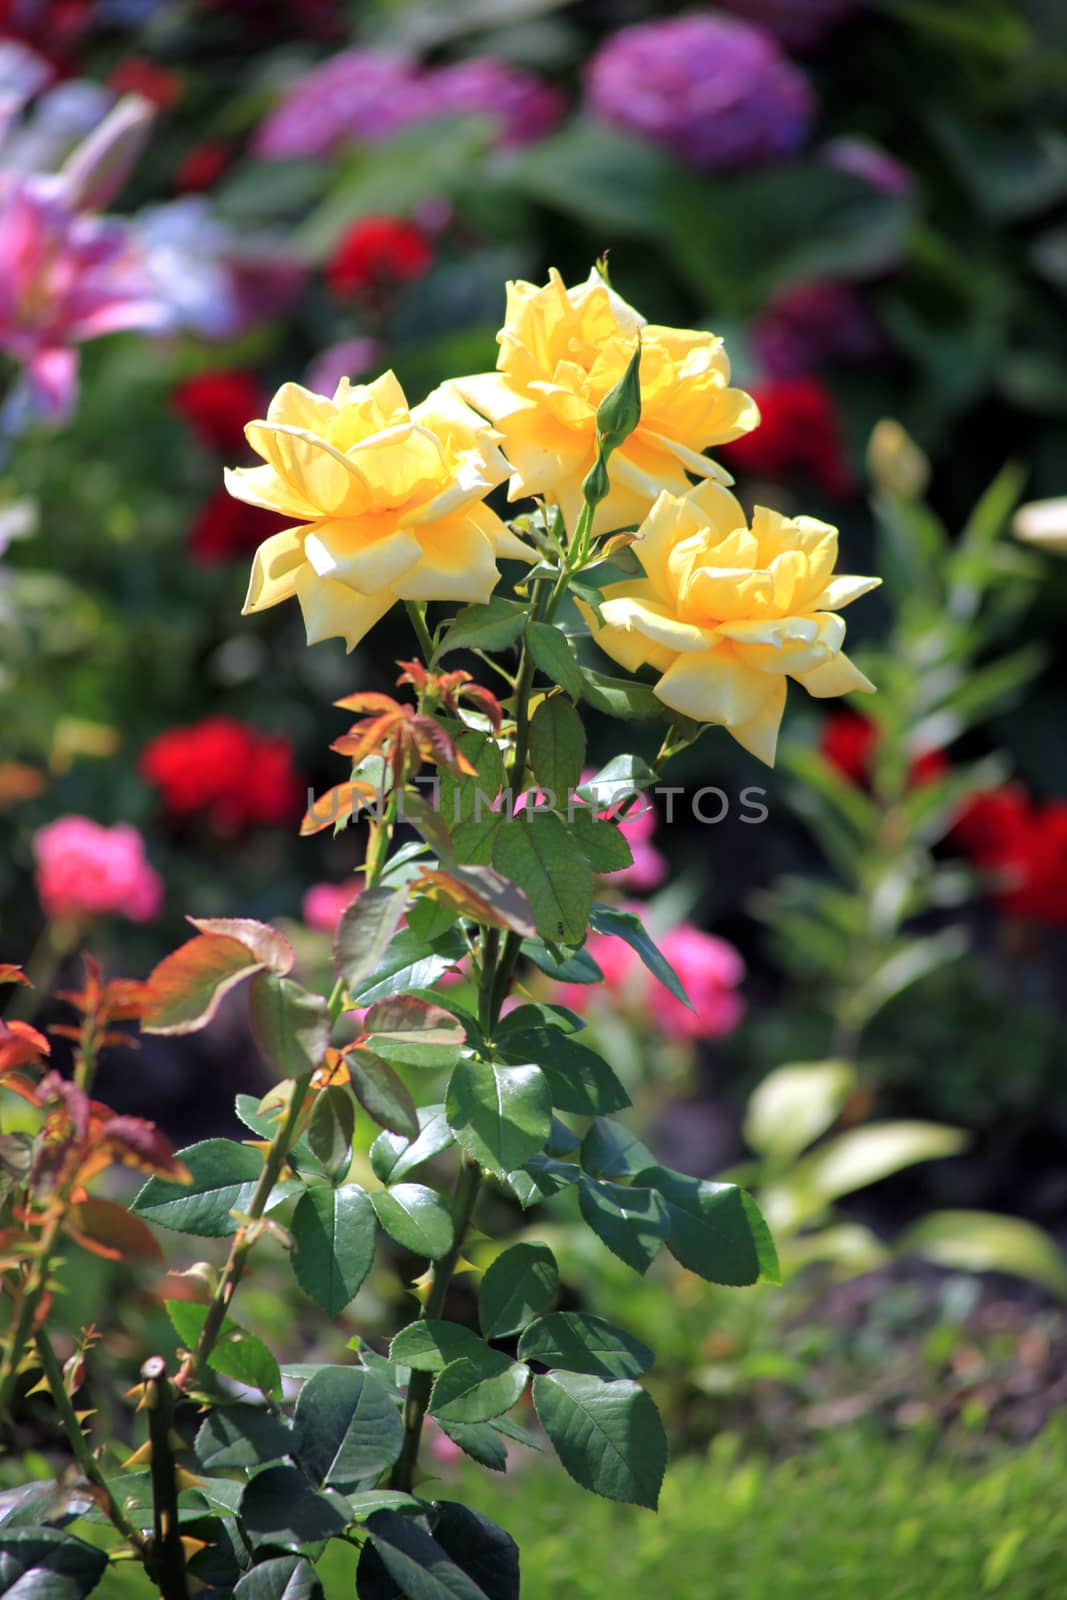 A bush with huge lush yellow roses on high green legs with prickly thorns